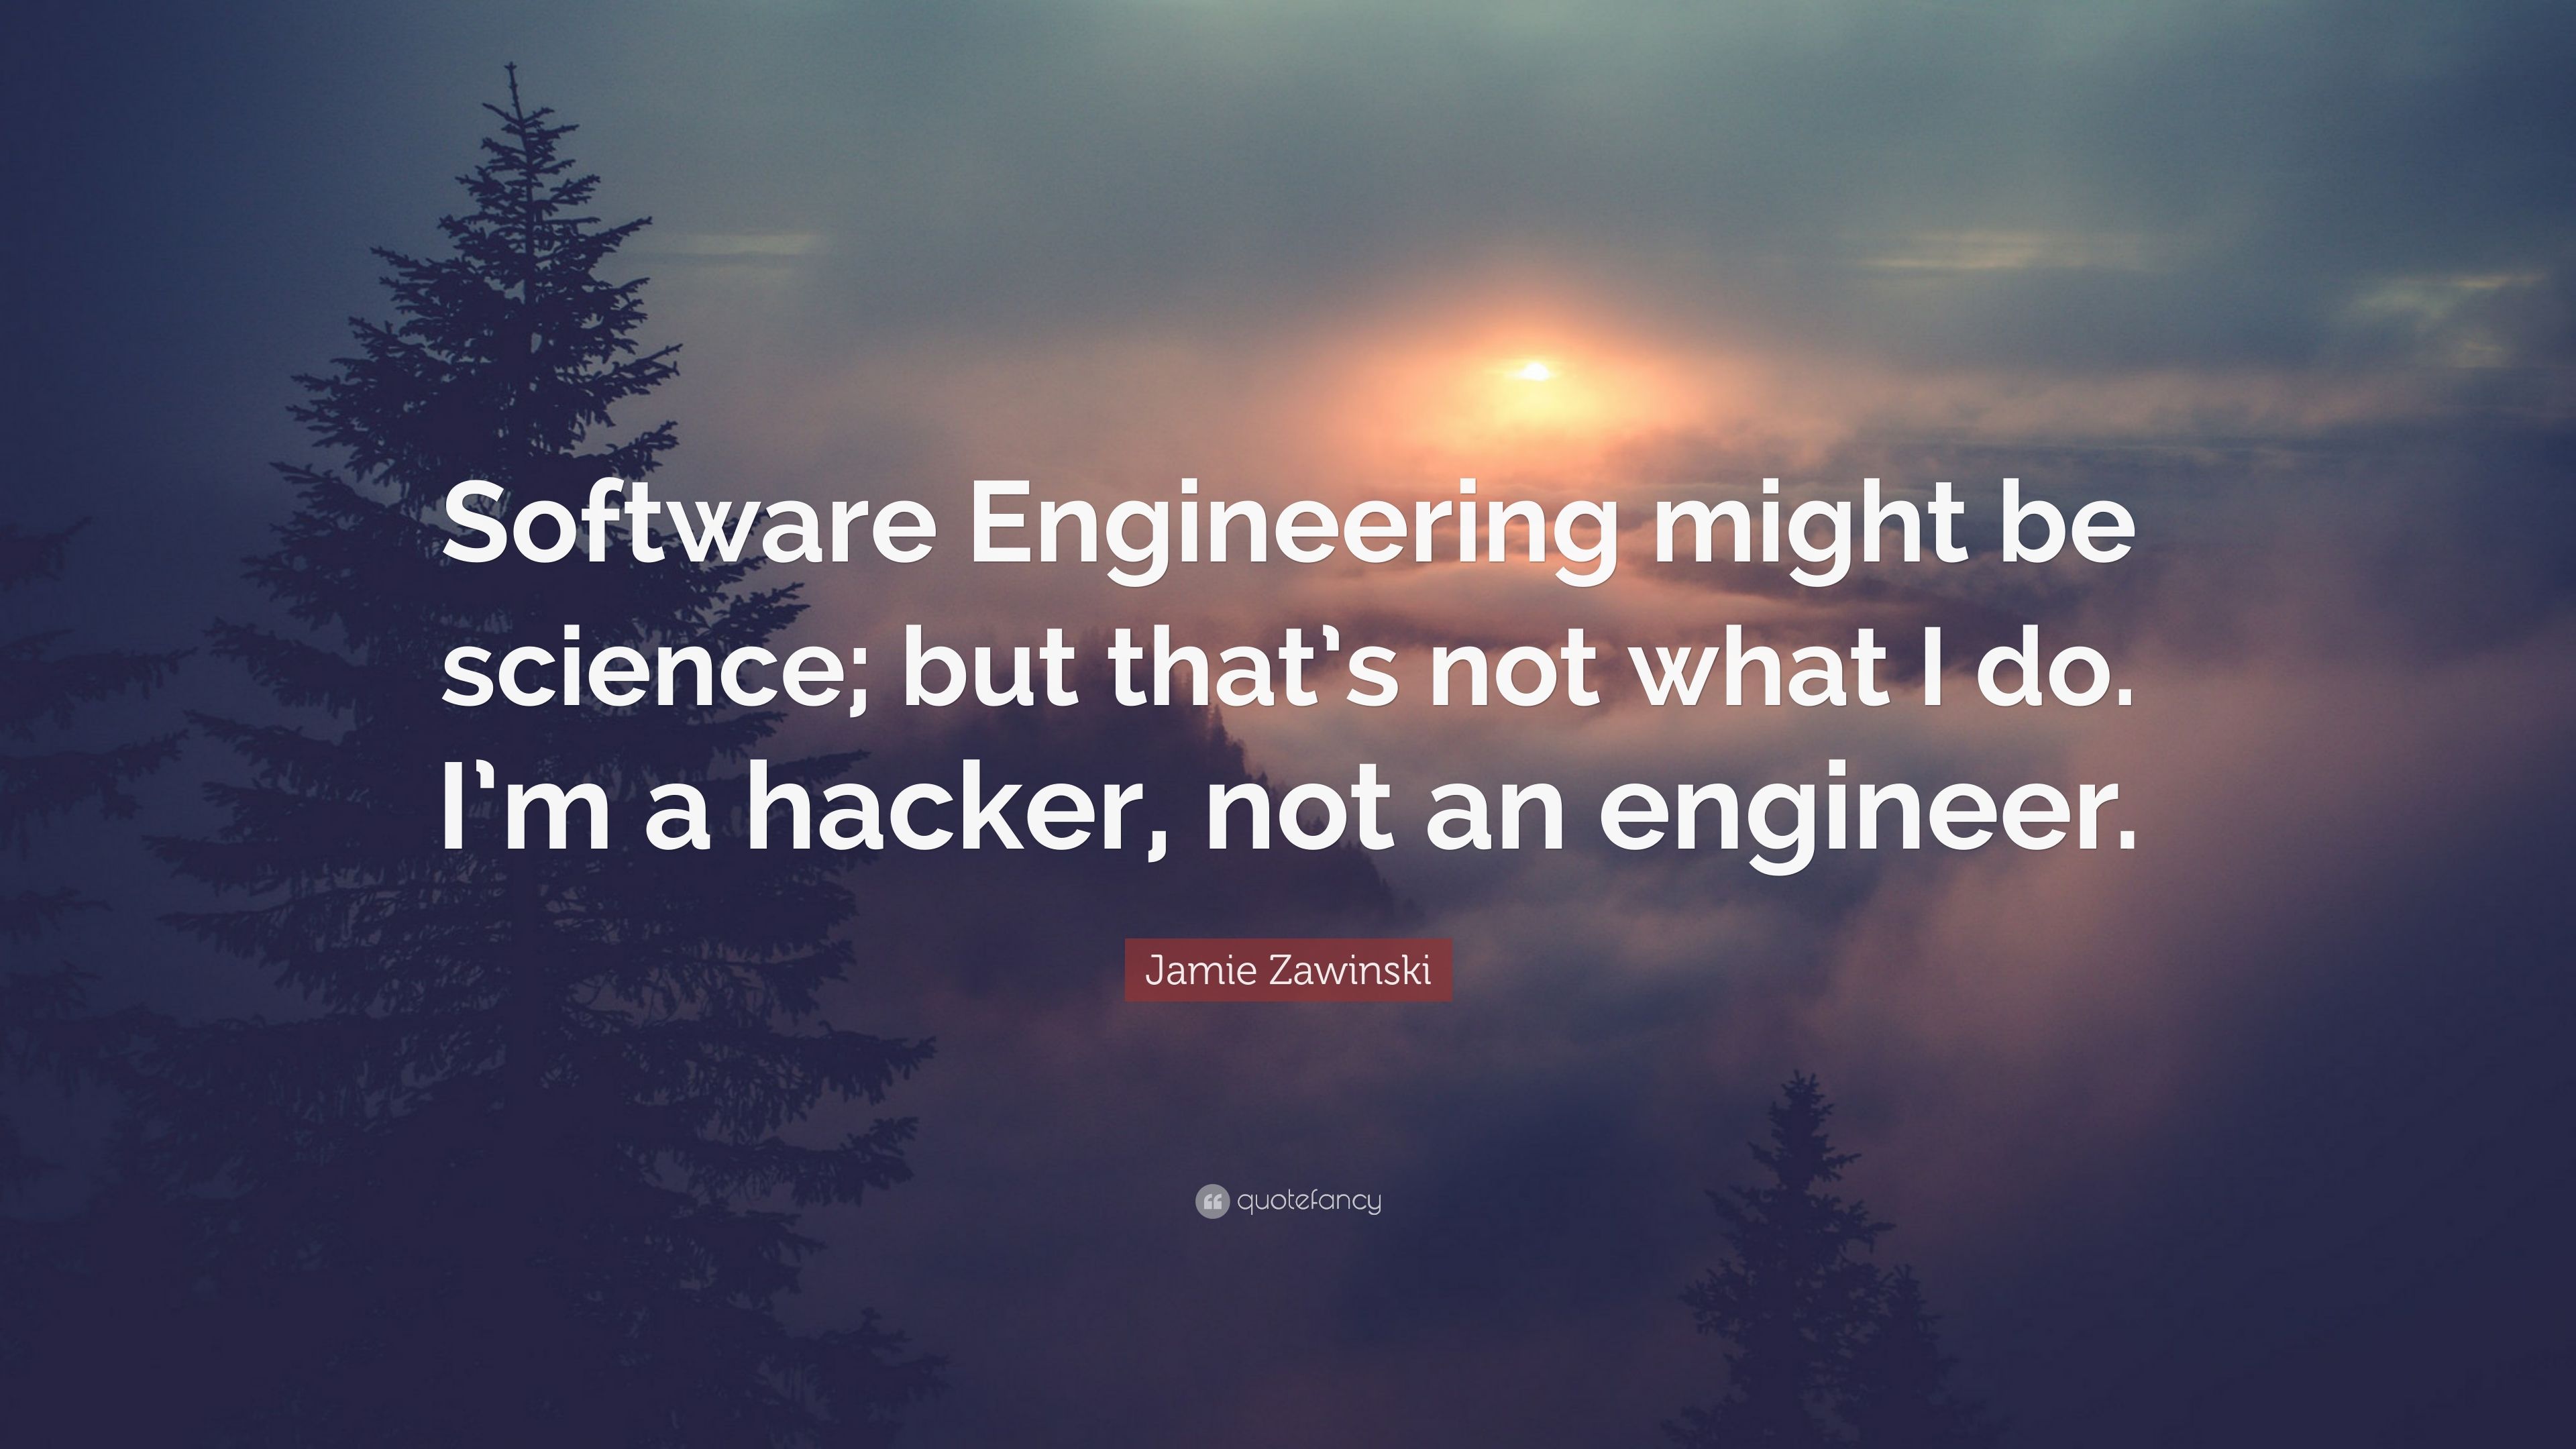 Jamie Zawinski Quote: “Software Engineering might be science; but that's not what I do. I'm a hacker, not an engineer.” (7 wallpaper)